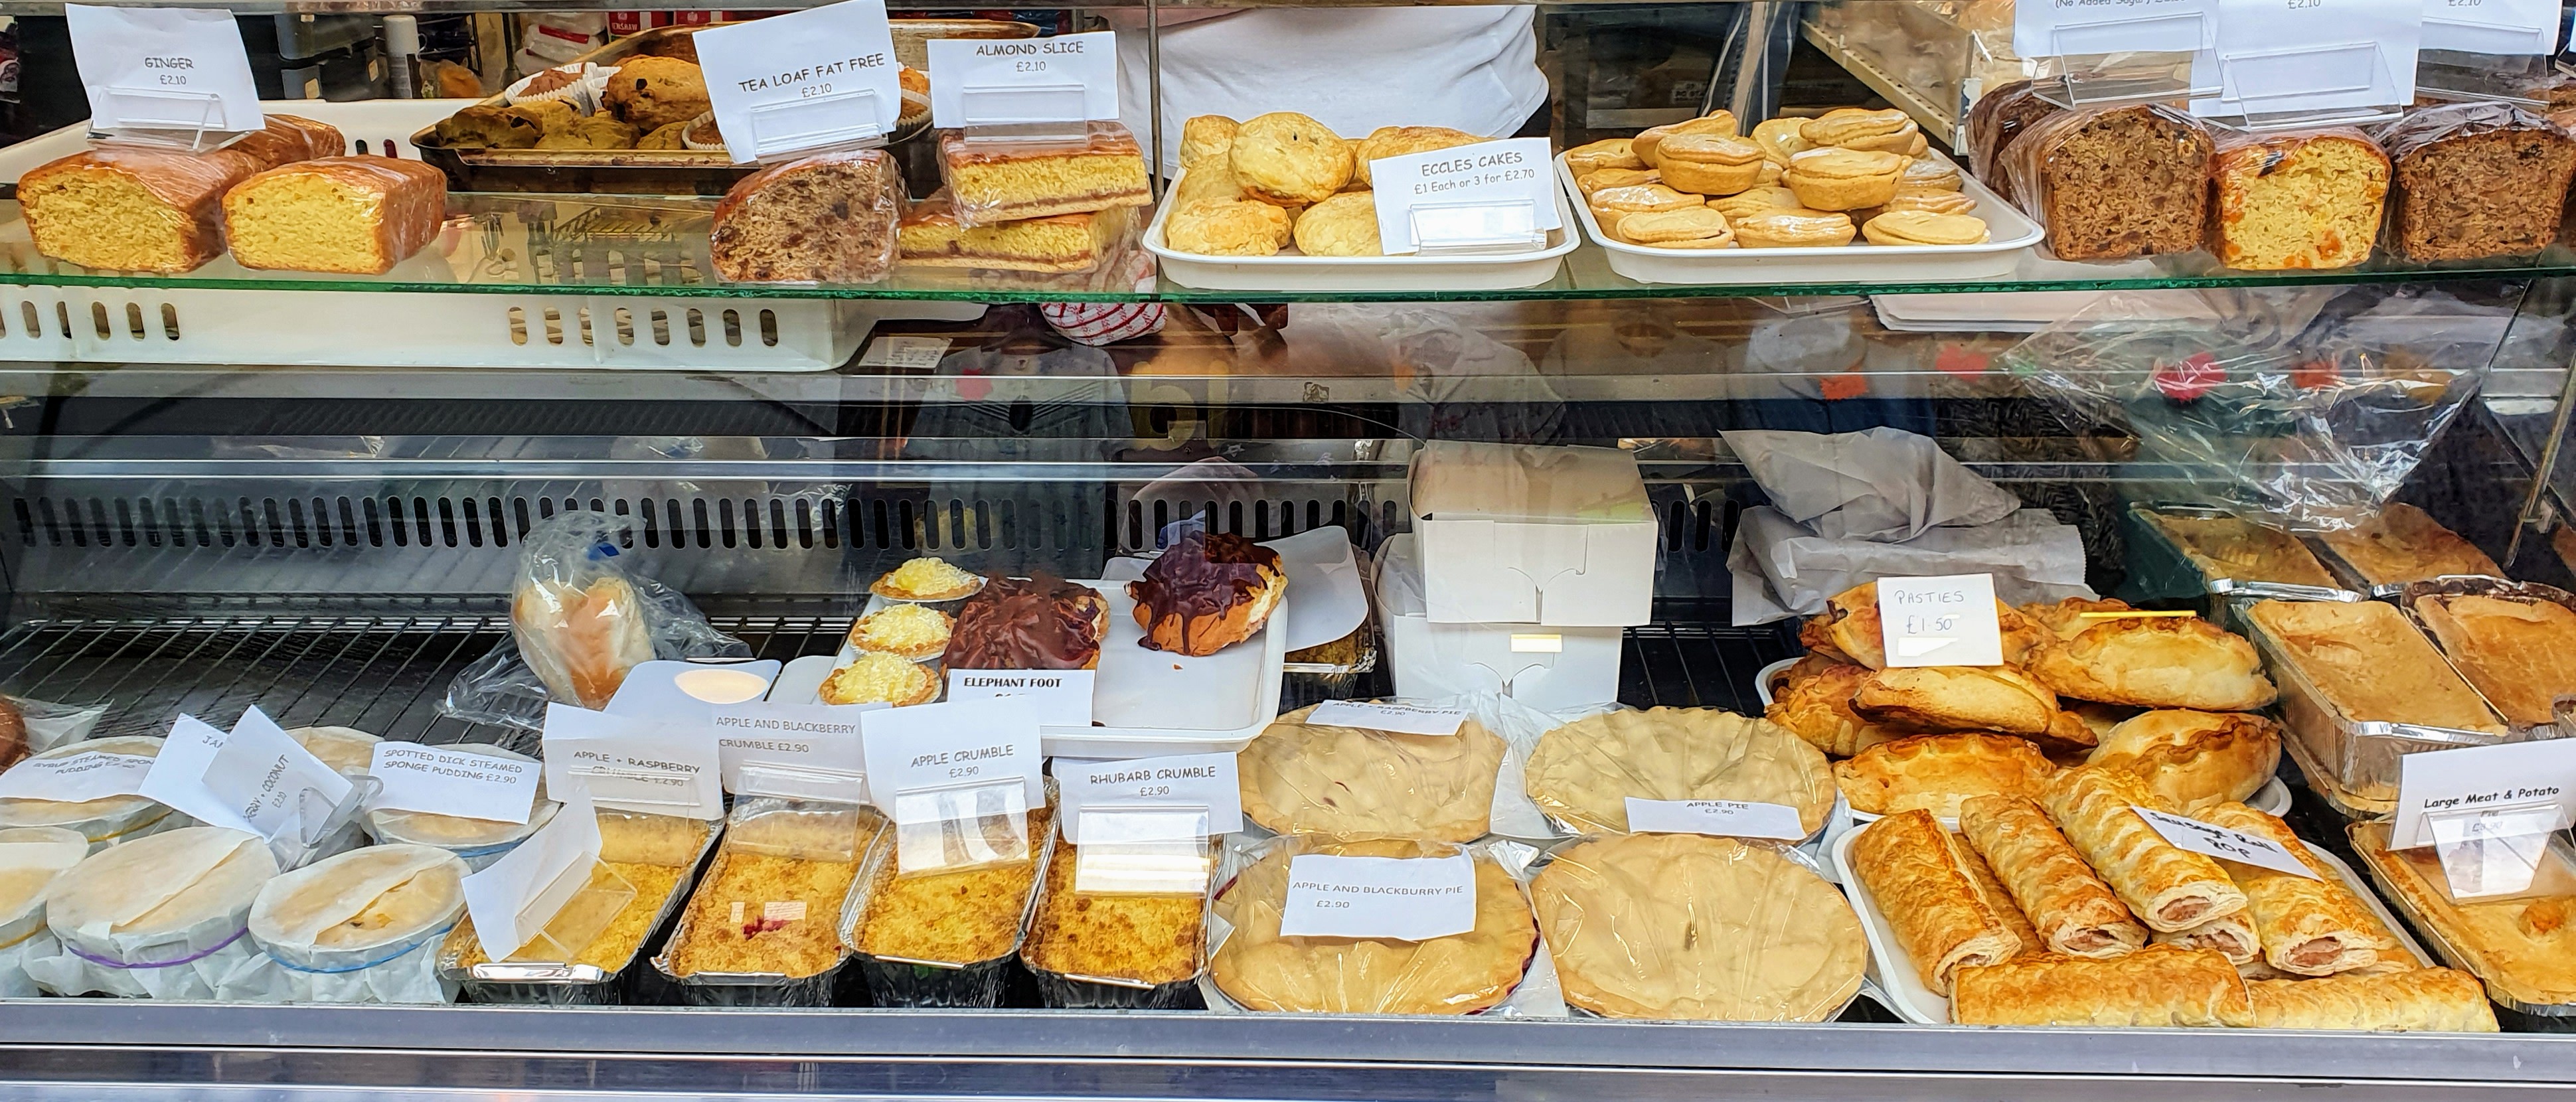 Sausage rolls, pies and cakes for sale inside the Butter Market, Leek, Staffordshire